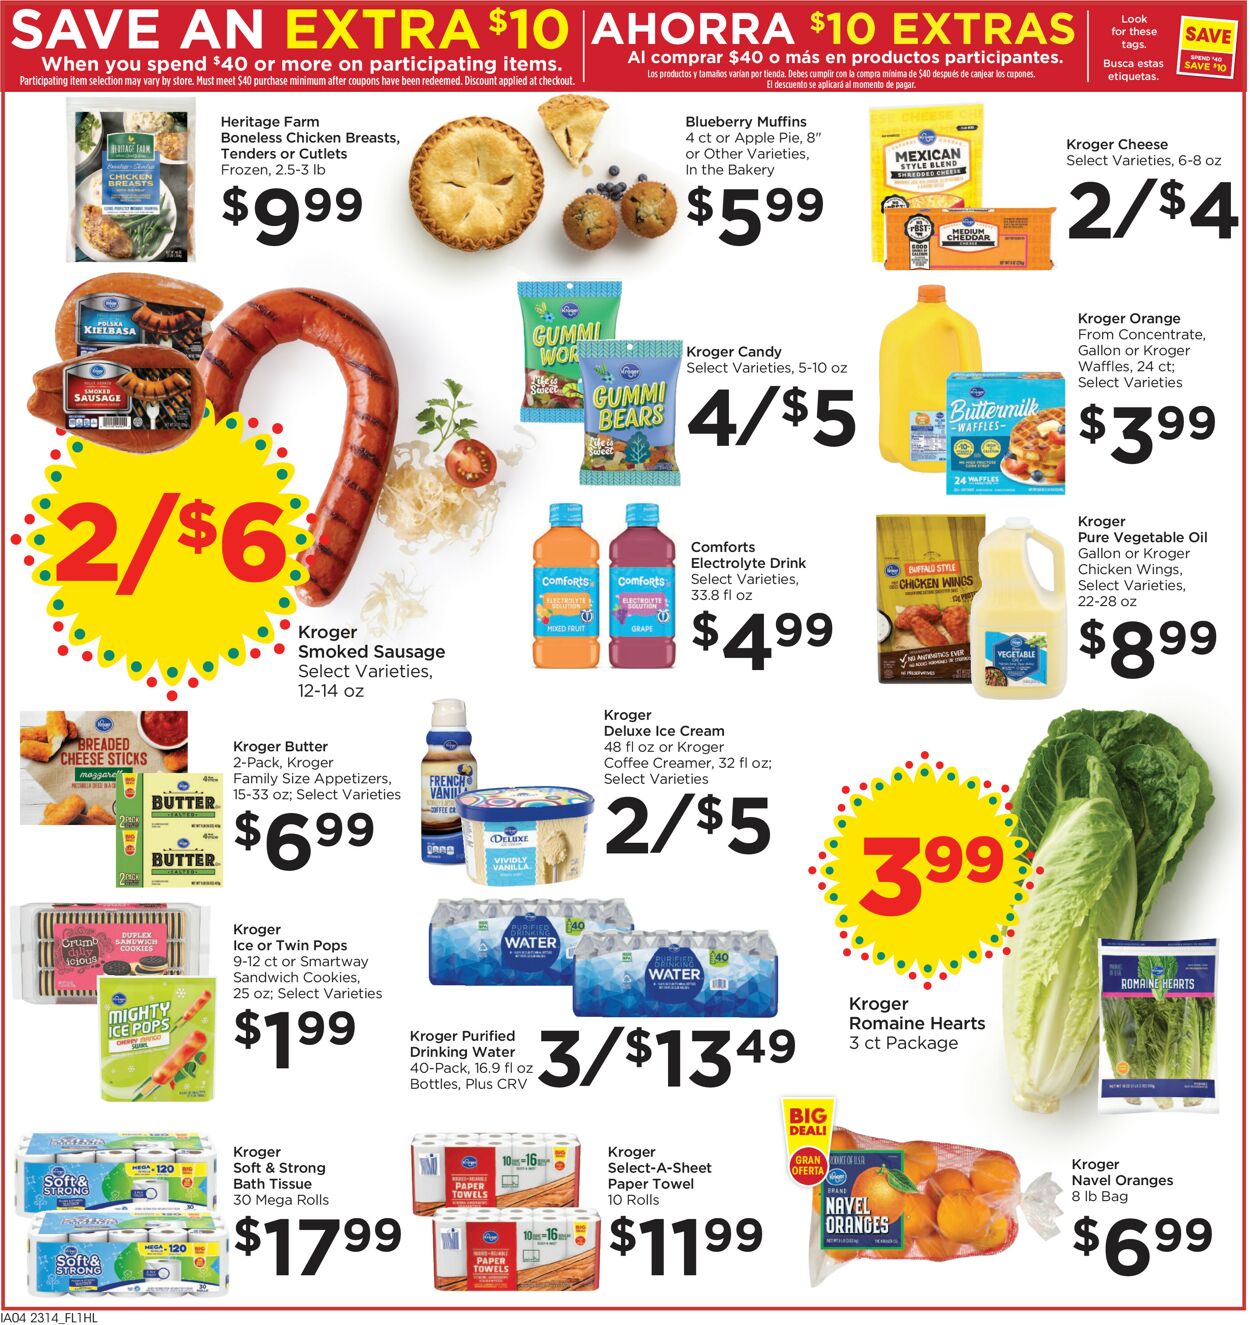 Catalogue Food 4 Less from 05/03/2023